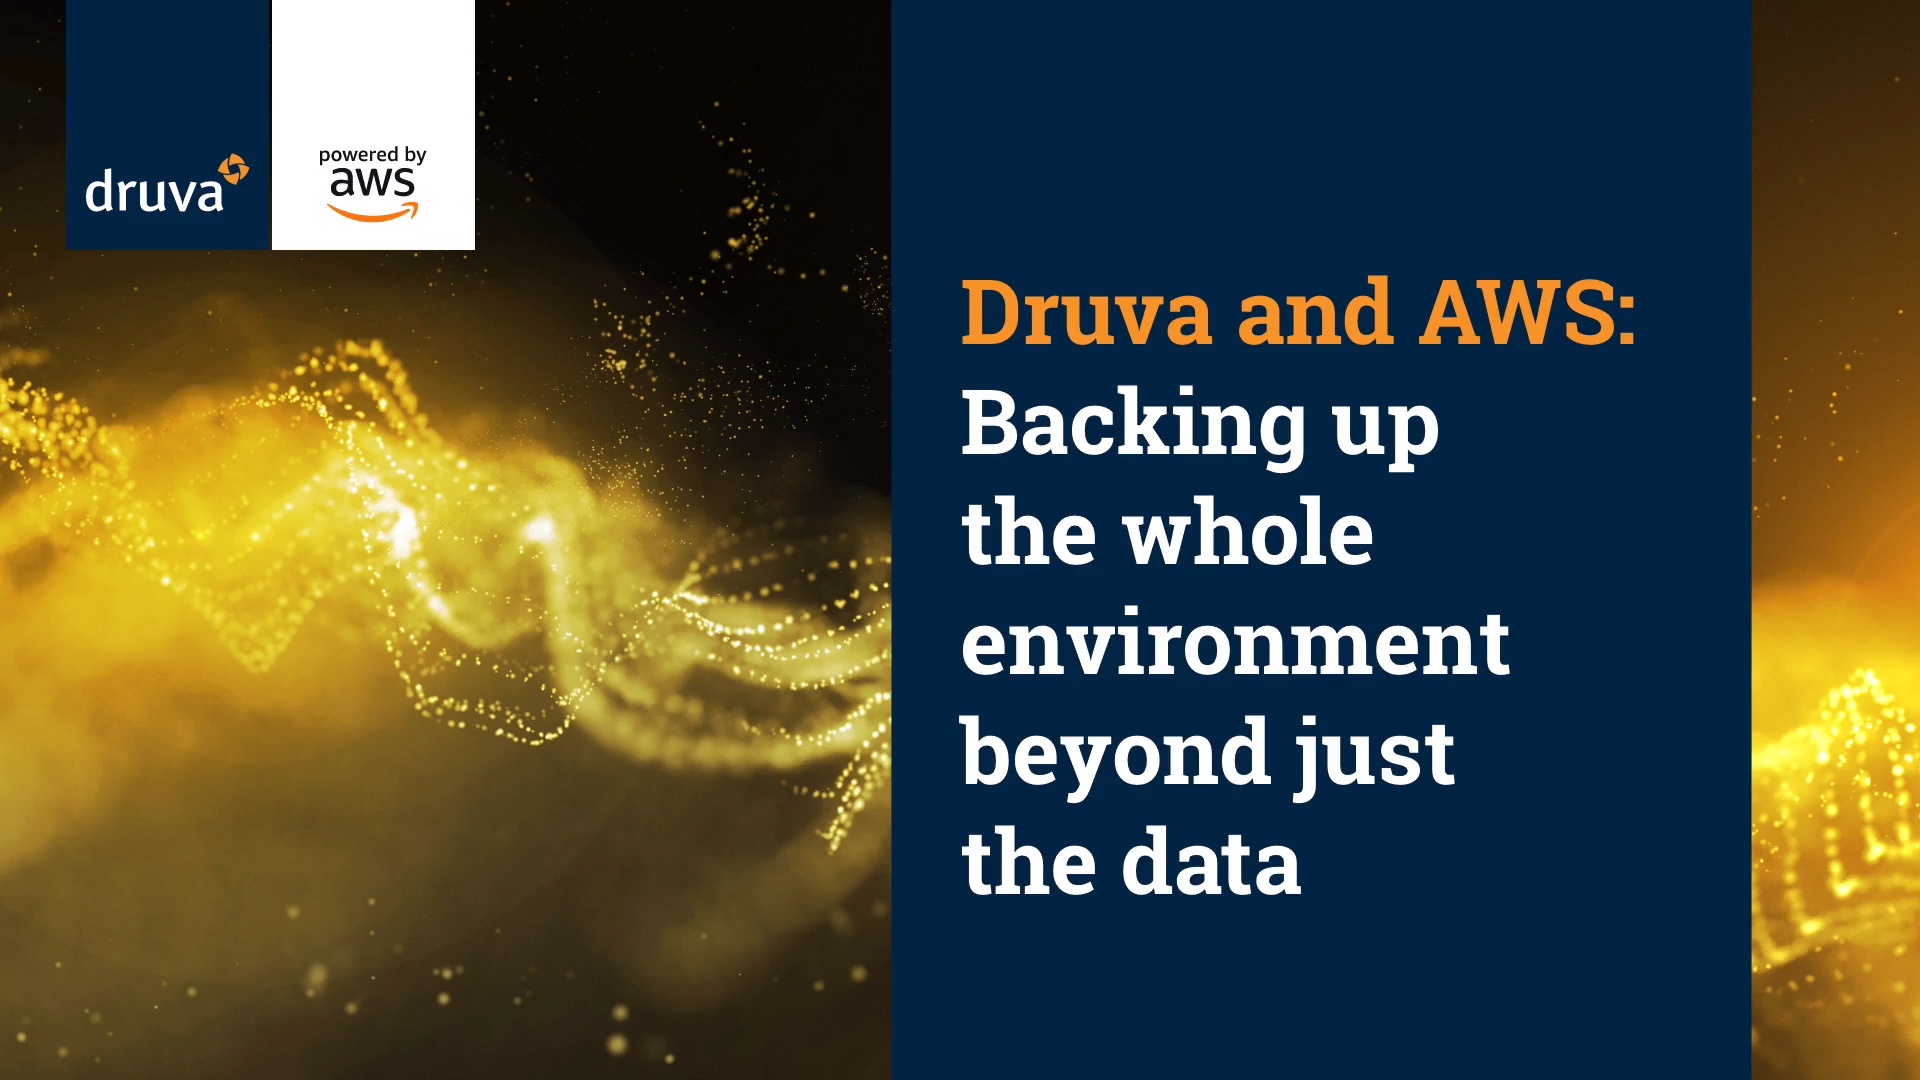 Druva and AWS: Backing up beyond just data